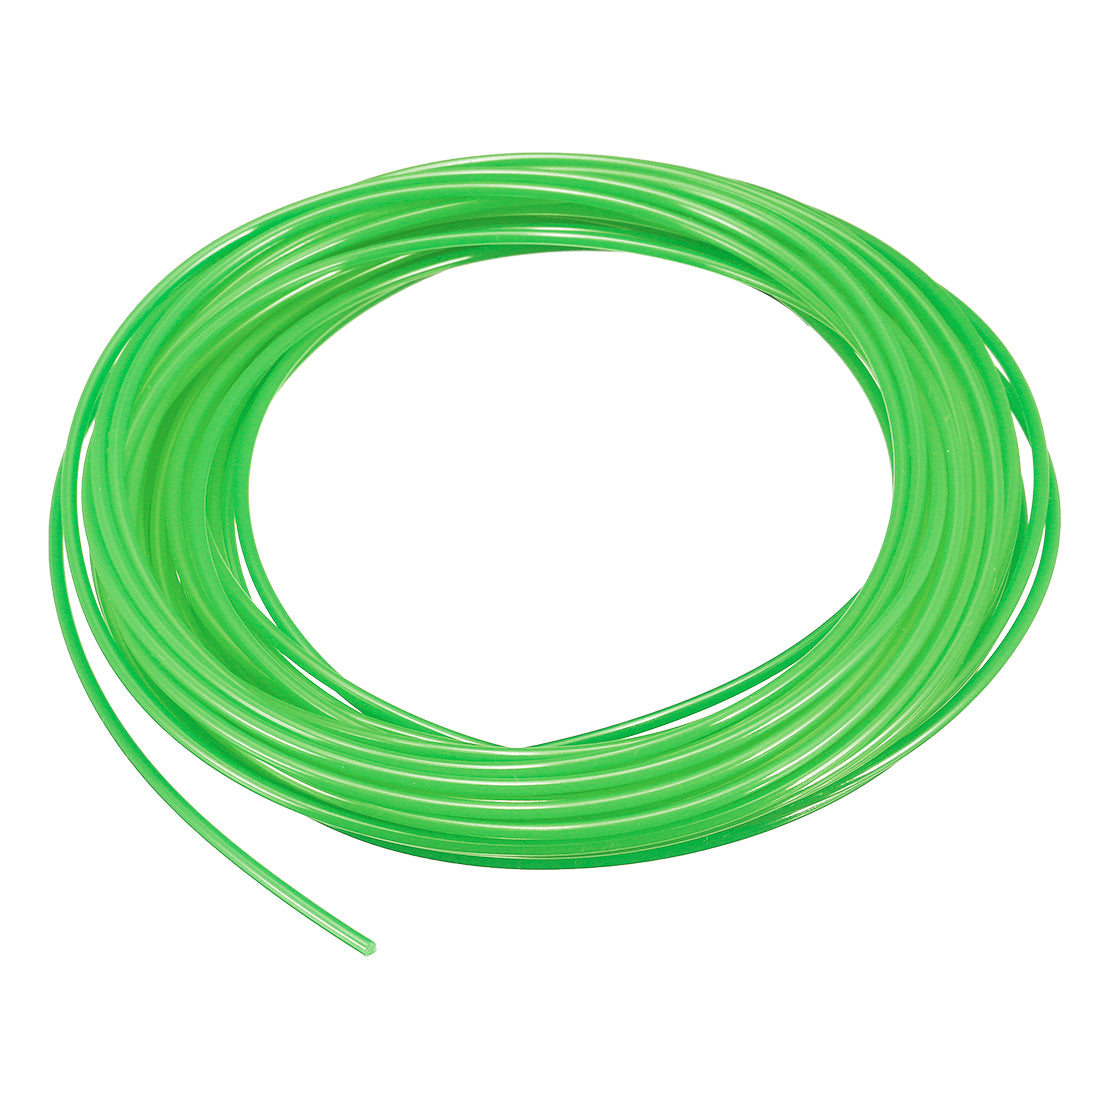 uxcell Uxcell 3D Printer Pen Filament Refills, 32.8Ft Length, 1.75 mm Dia, PLA, Dimensional Accuracy +/- 0.02mm, for 3D Painting and Drawing,Green